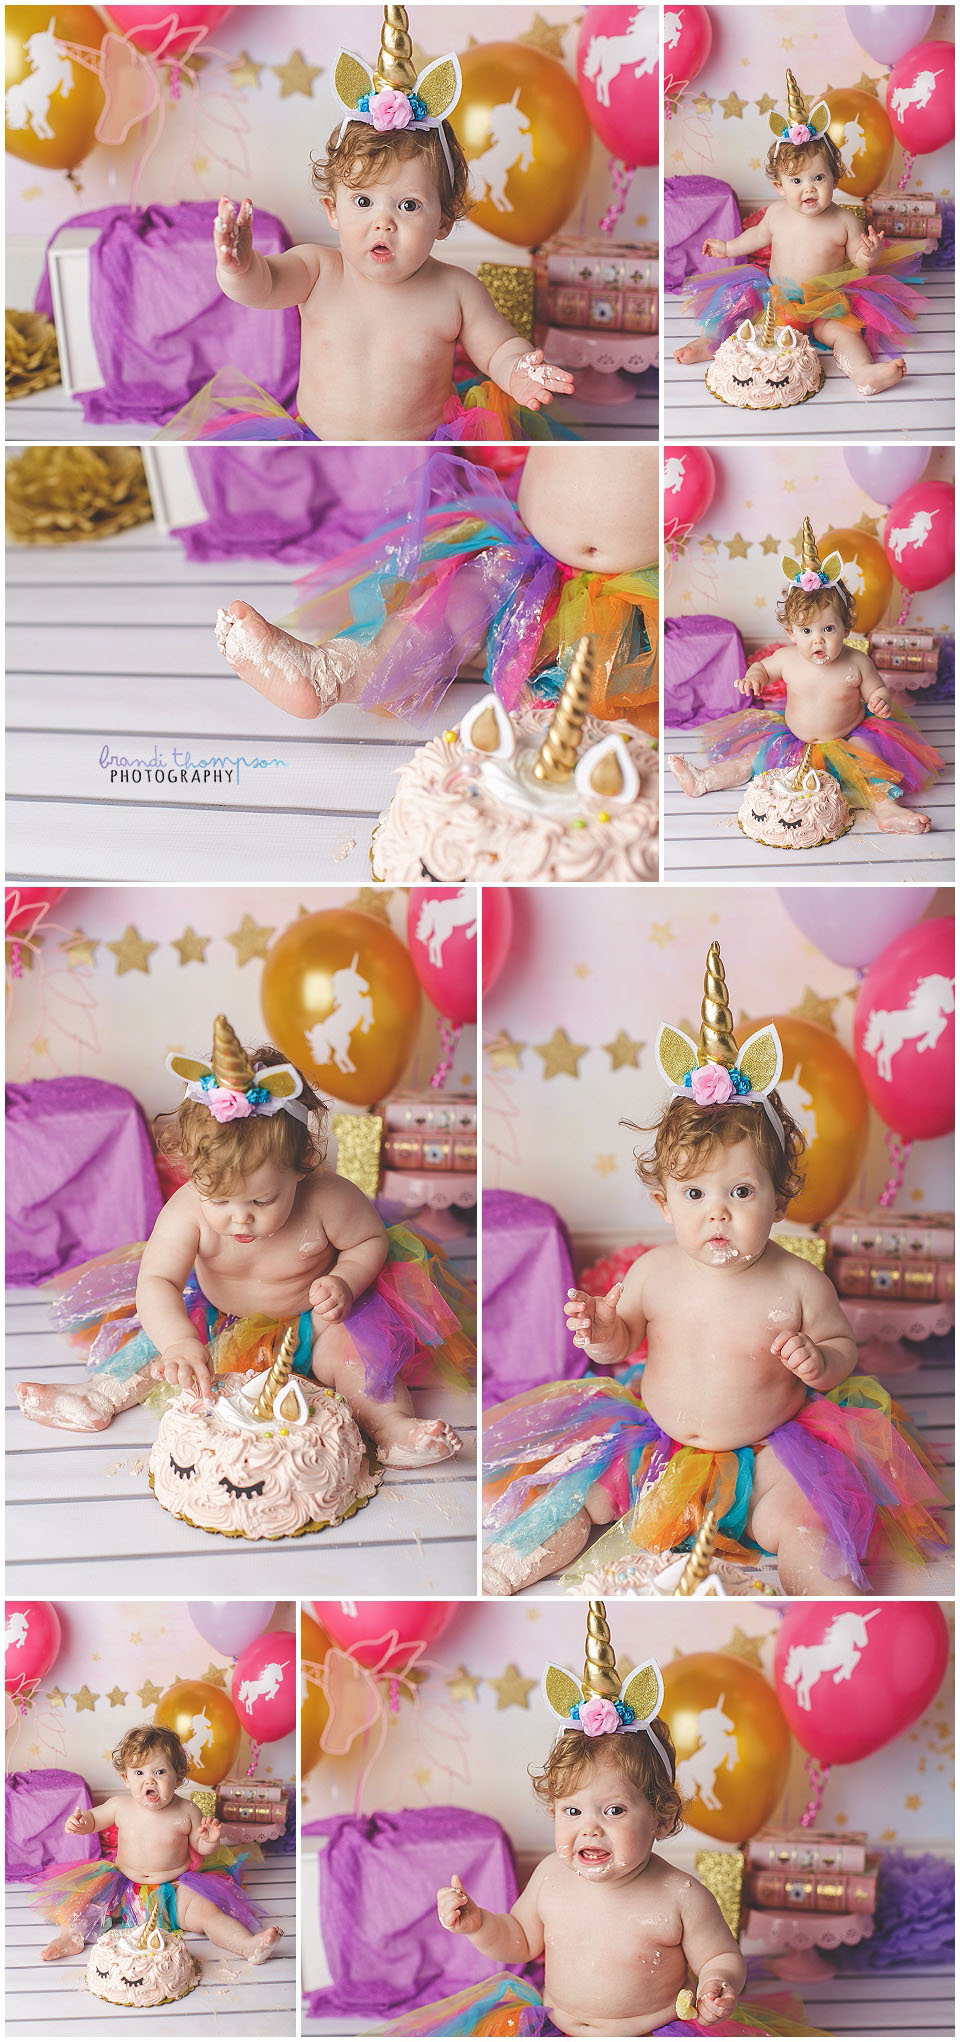 unicorn themed cake smash session for baby girl in plano, tx photography studio